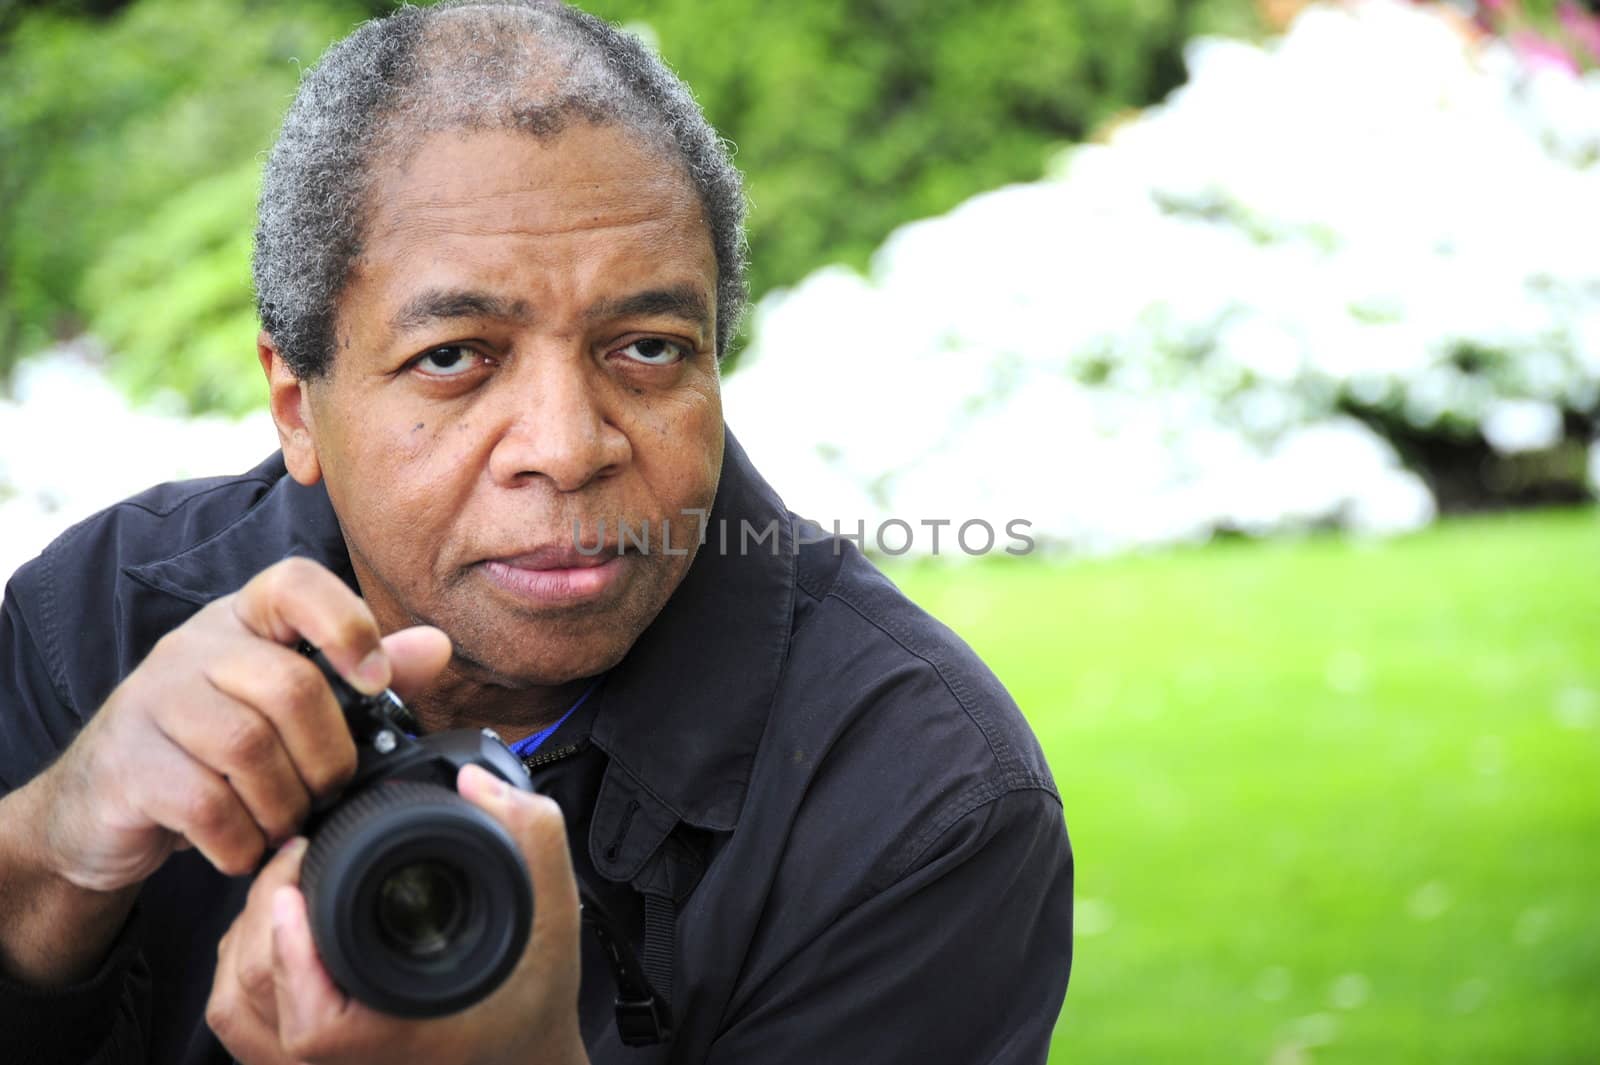 African american photographer on assignment.